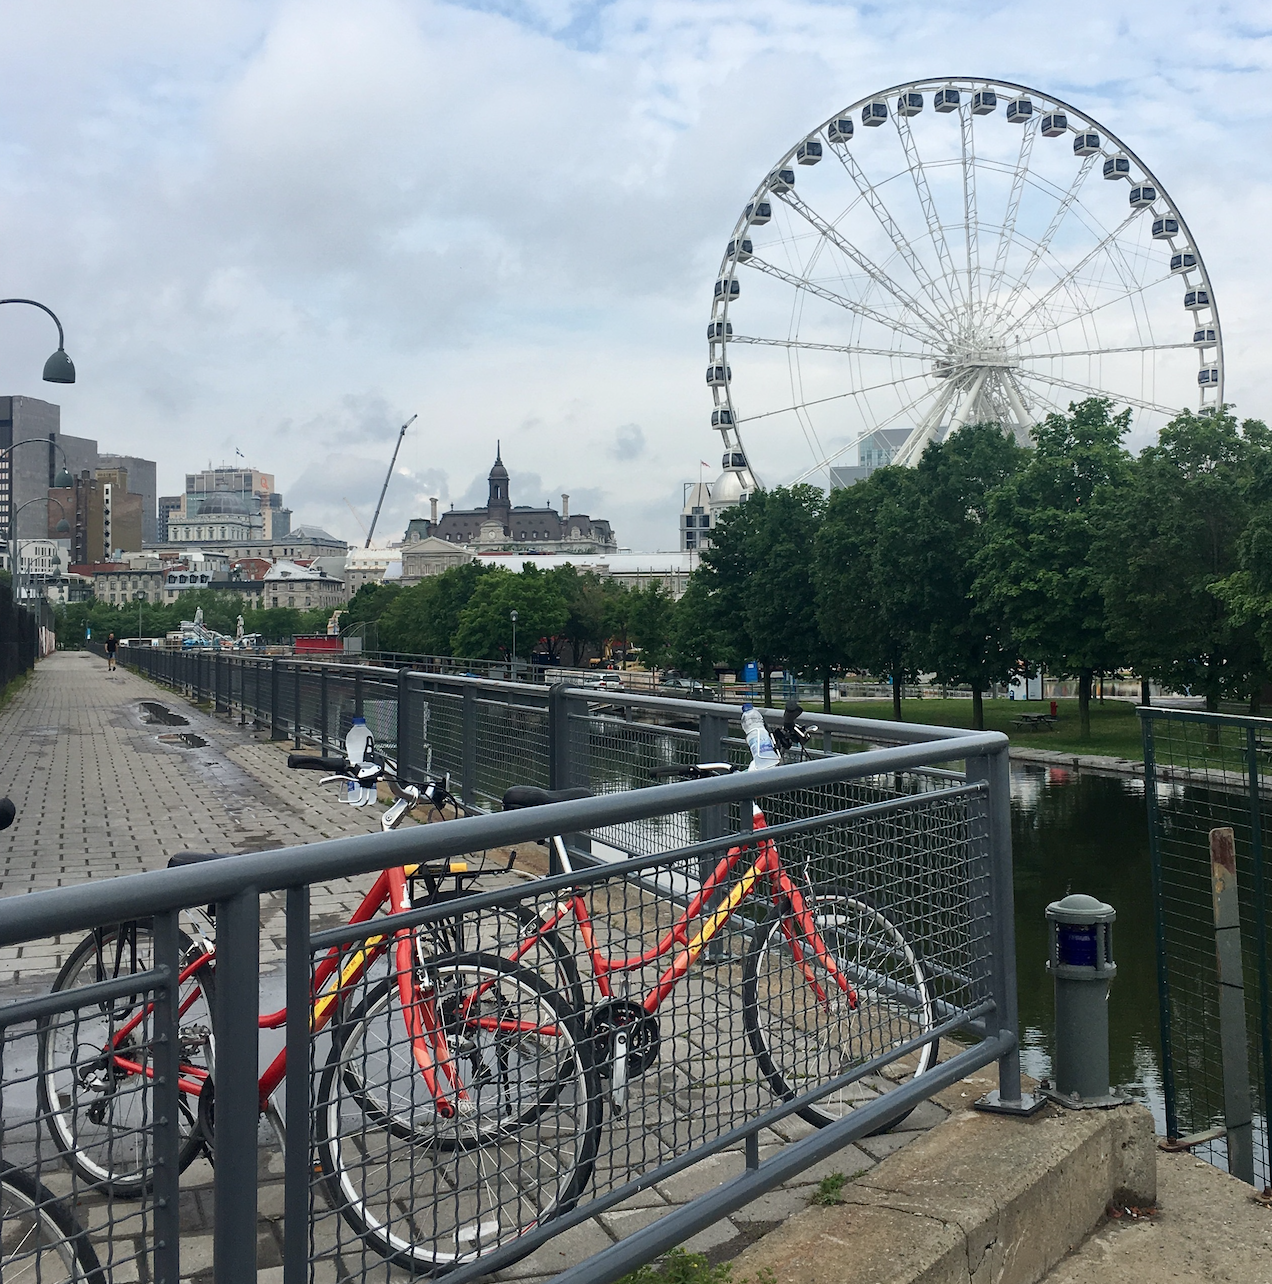 a bicycle parked on a bridge next to a body of water and a ferris wheel